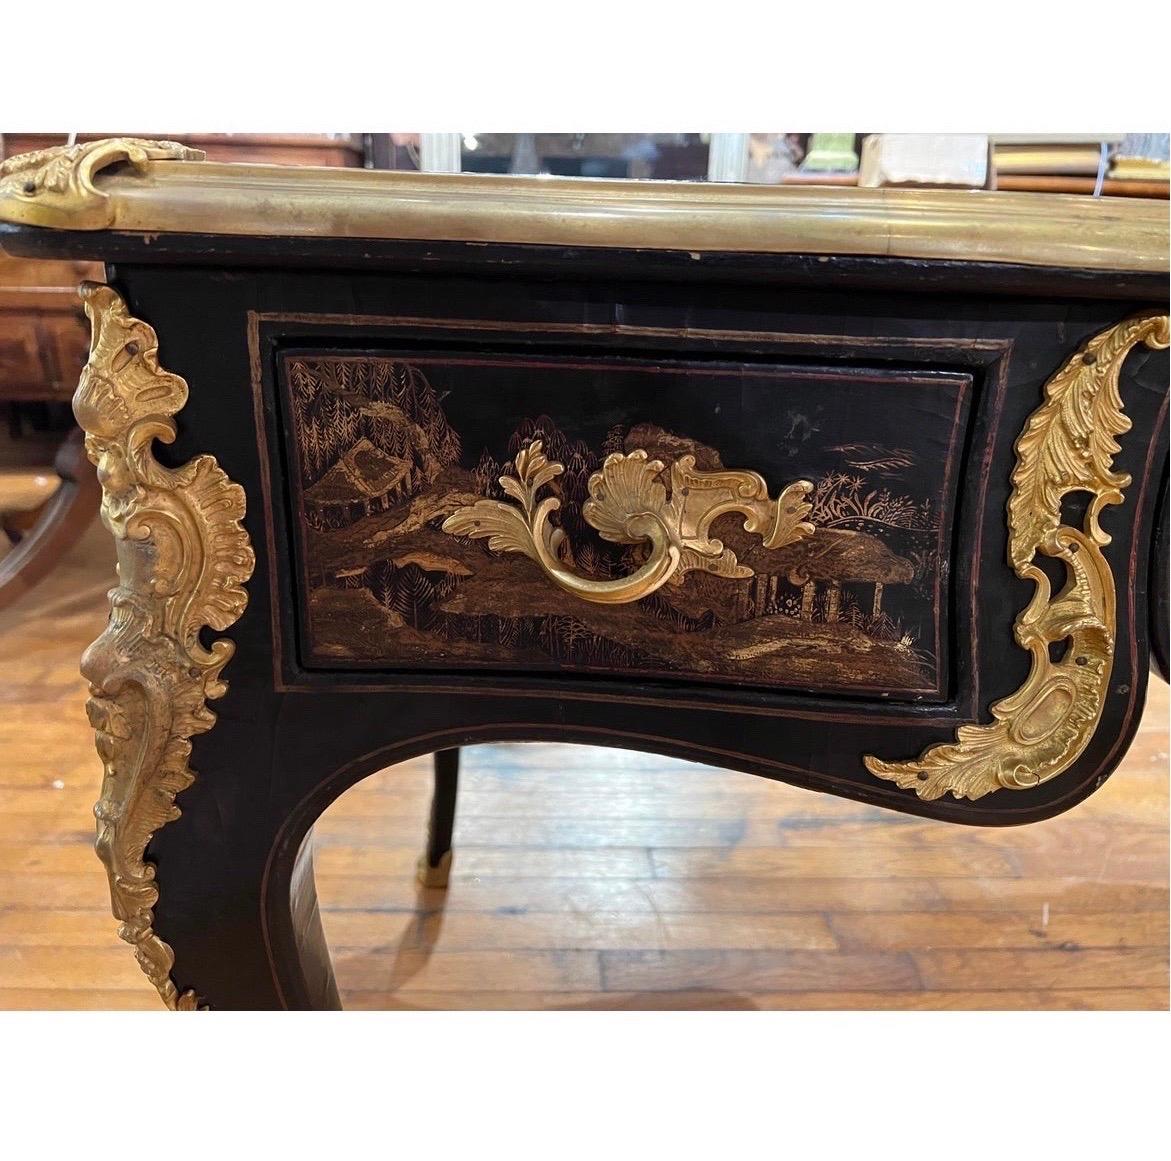 A fantastic antique french chinoiserie desk with impressive bronze ormolu mounting to legs, drawers and edges. Leather top featuring hand tooled gilt design. 3 drawers on one side and faux drawers to verso. Absolutely stunning piece for a collector